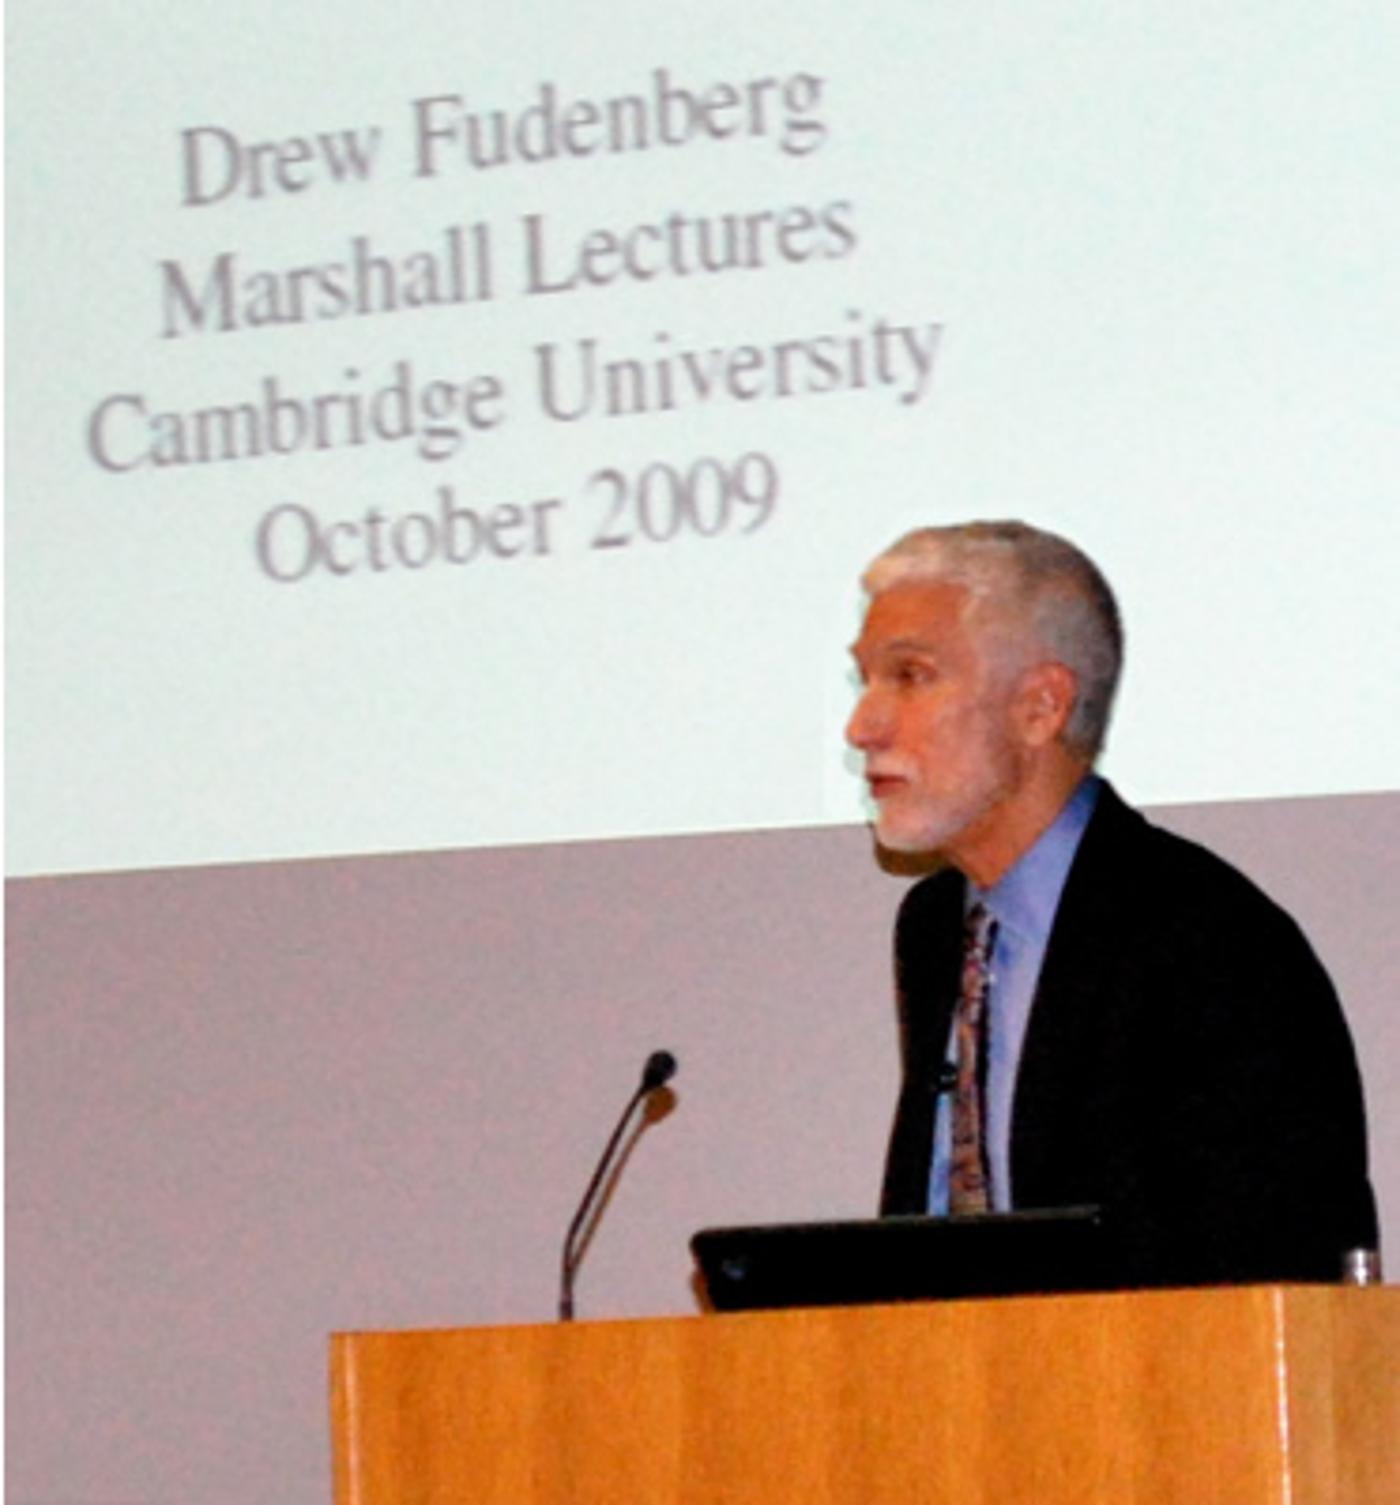 Marshall Lectures 2009 - Professor Drew Fudenberg - Learning and Equilibrium in Games - Lecture 2